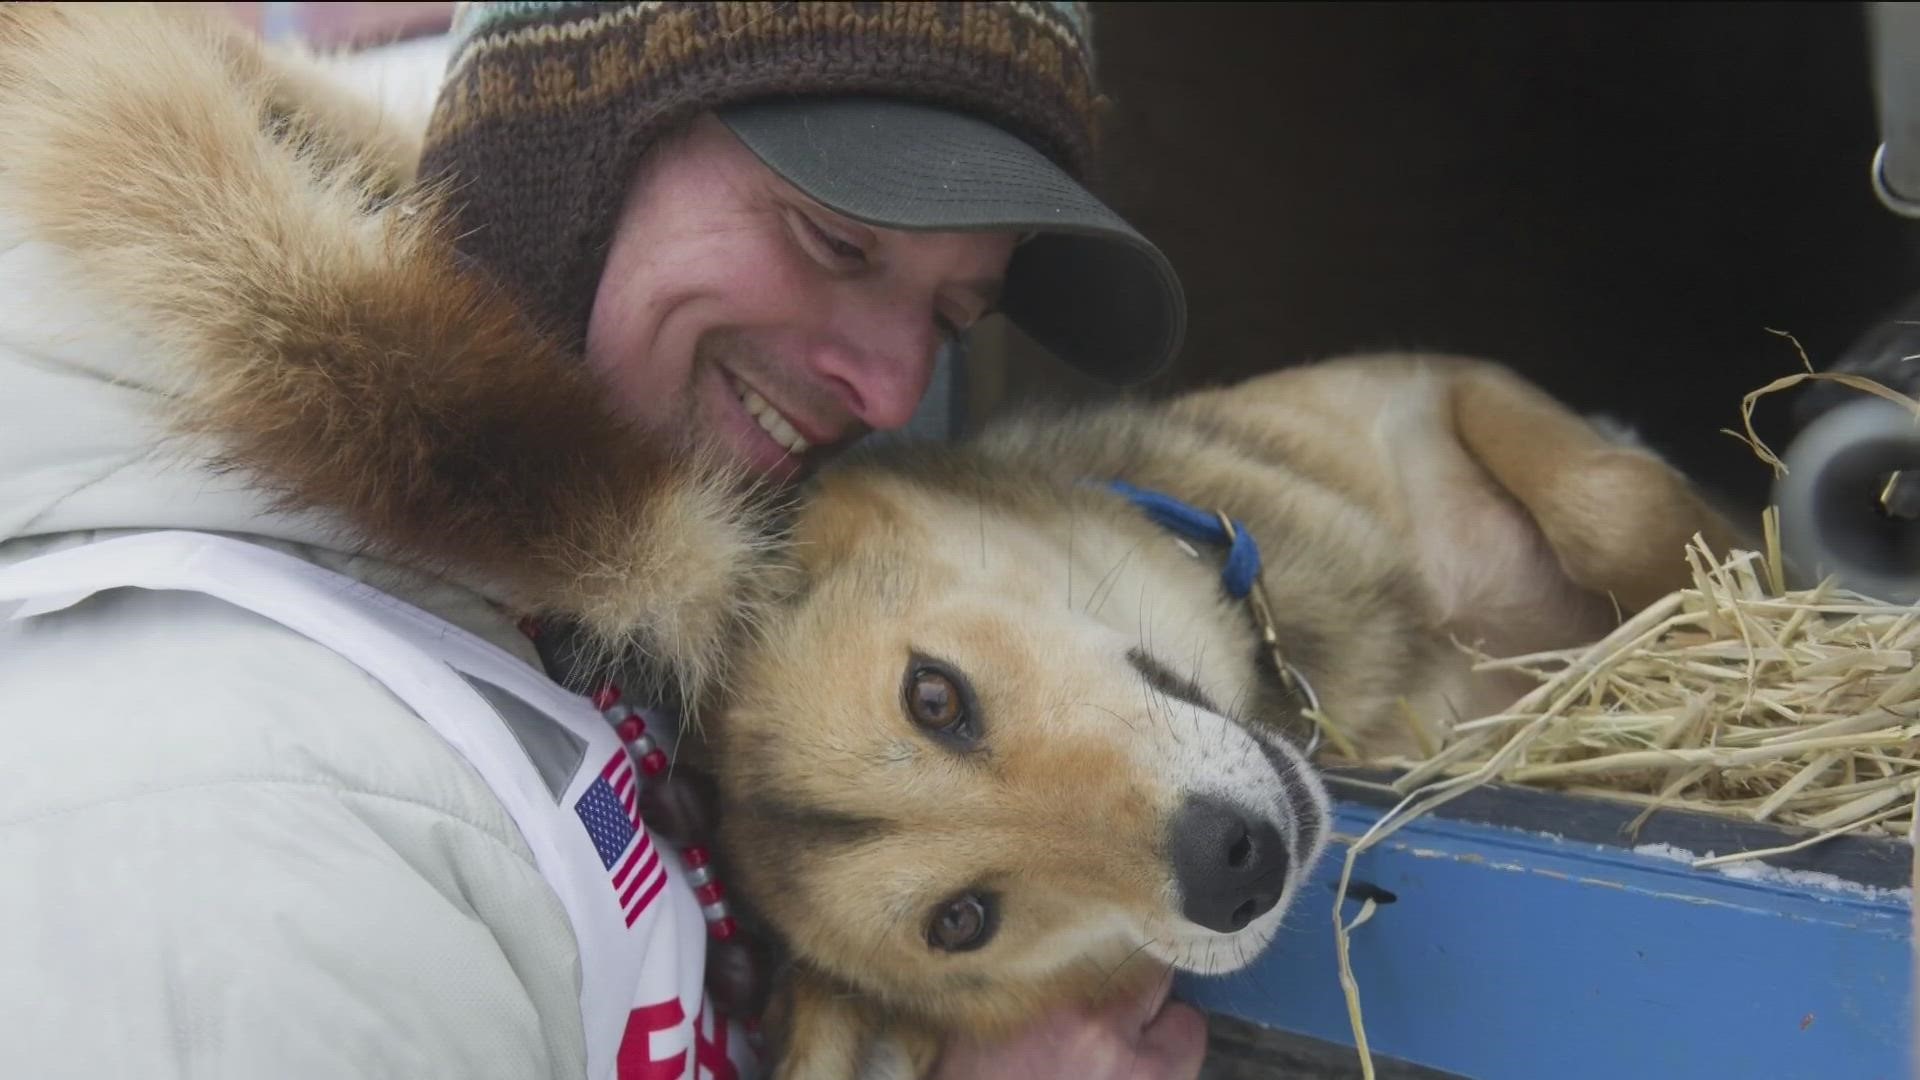 Jed Stephensen of Sandpoint aims to become the first Idahoan to win the Iditarod Trail Sled Dog Race since 1989. The nearly 1,000-mile race begins on Sunday.